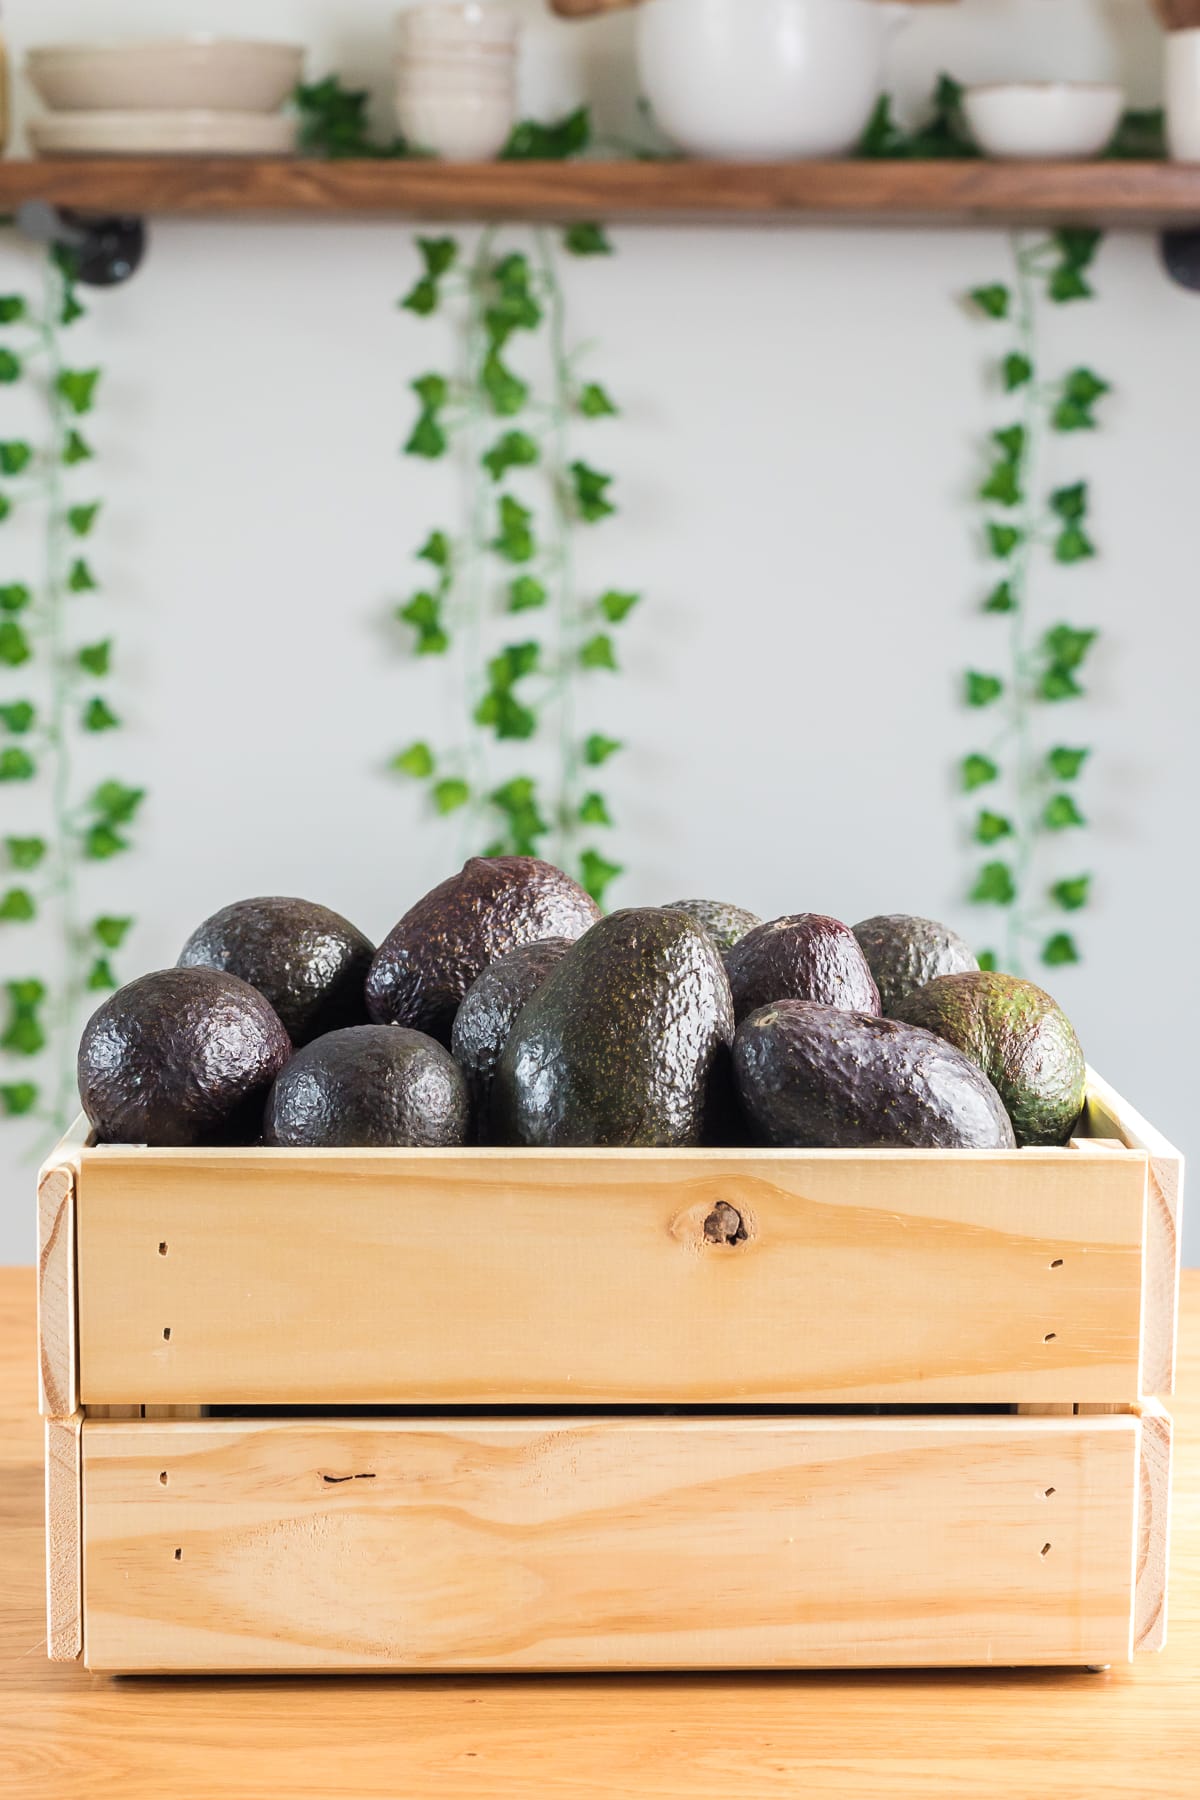 crate filled with ripe avocados.